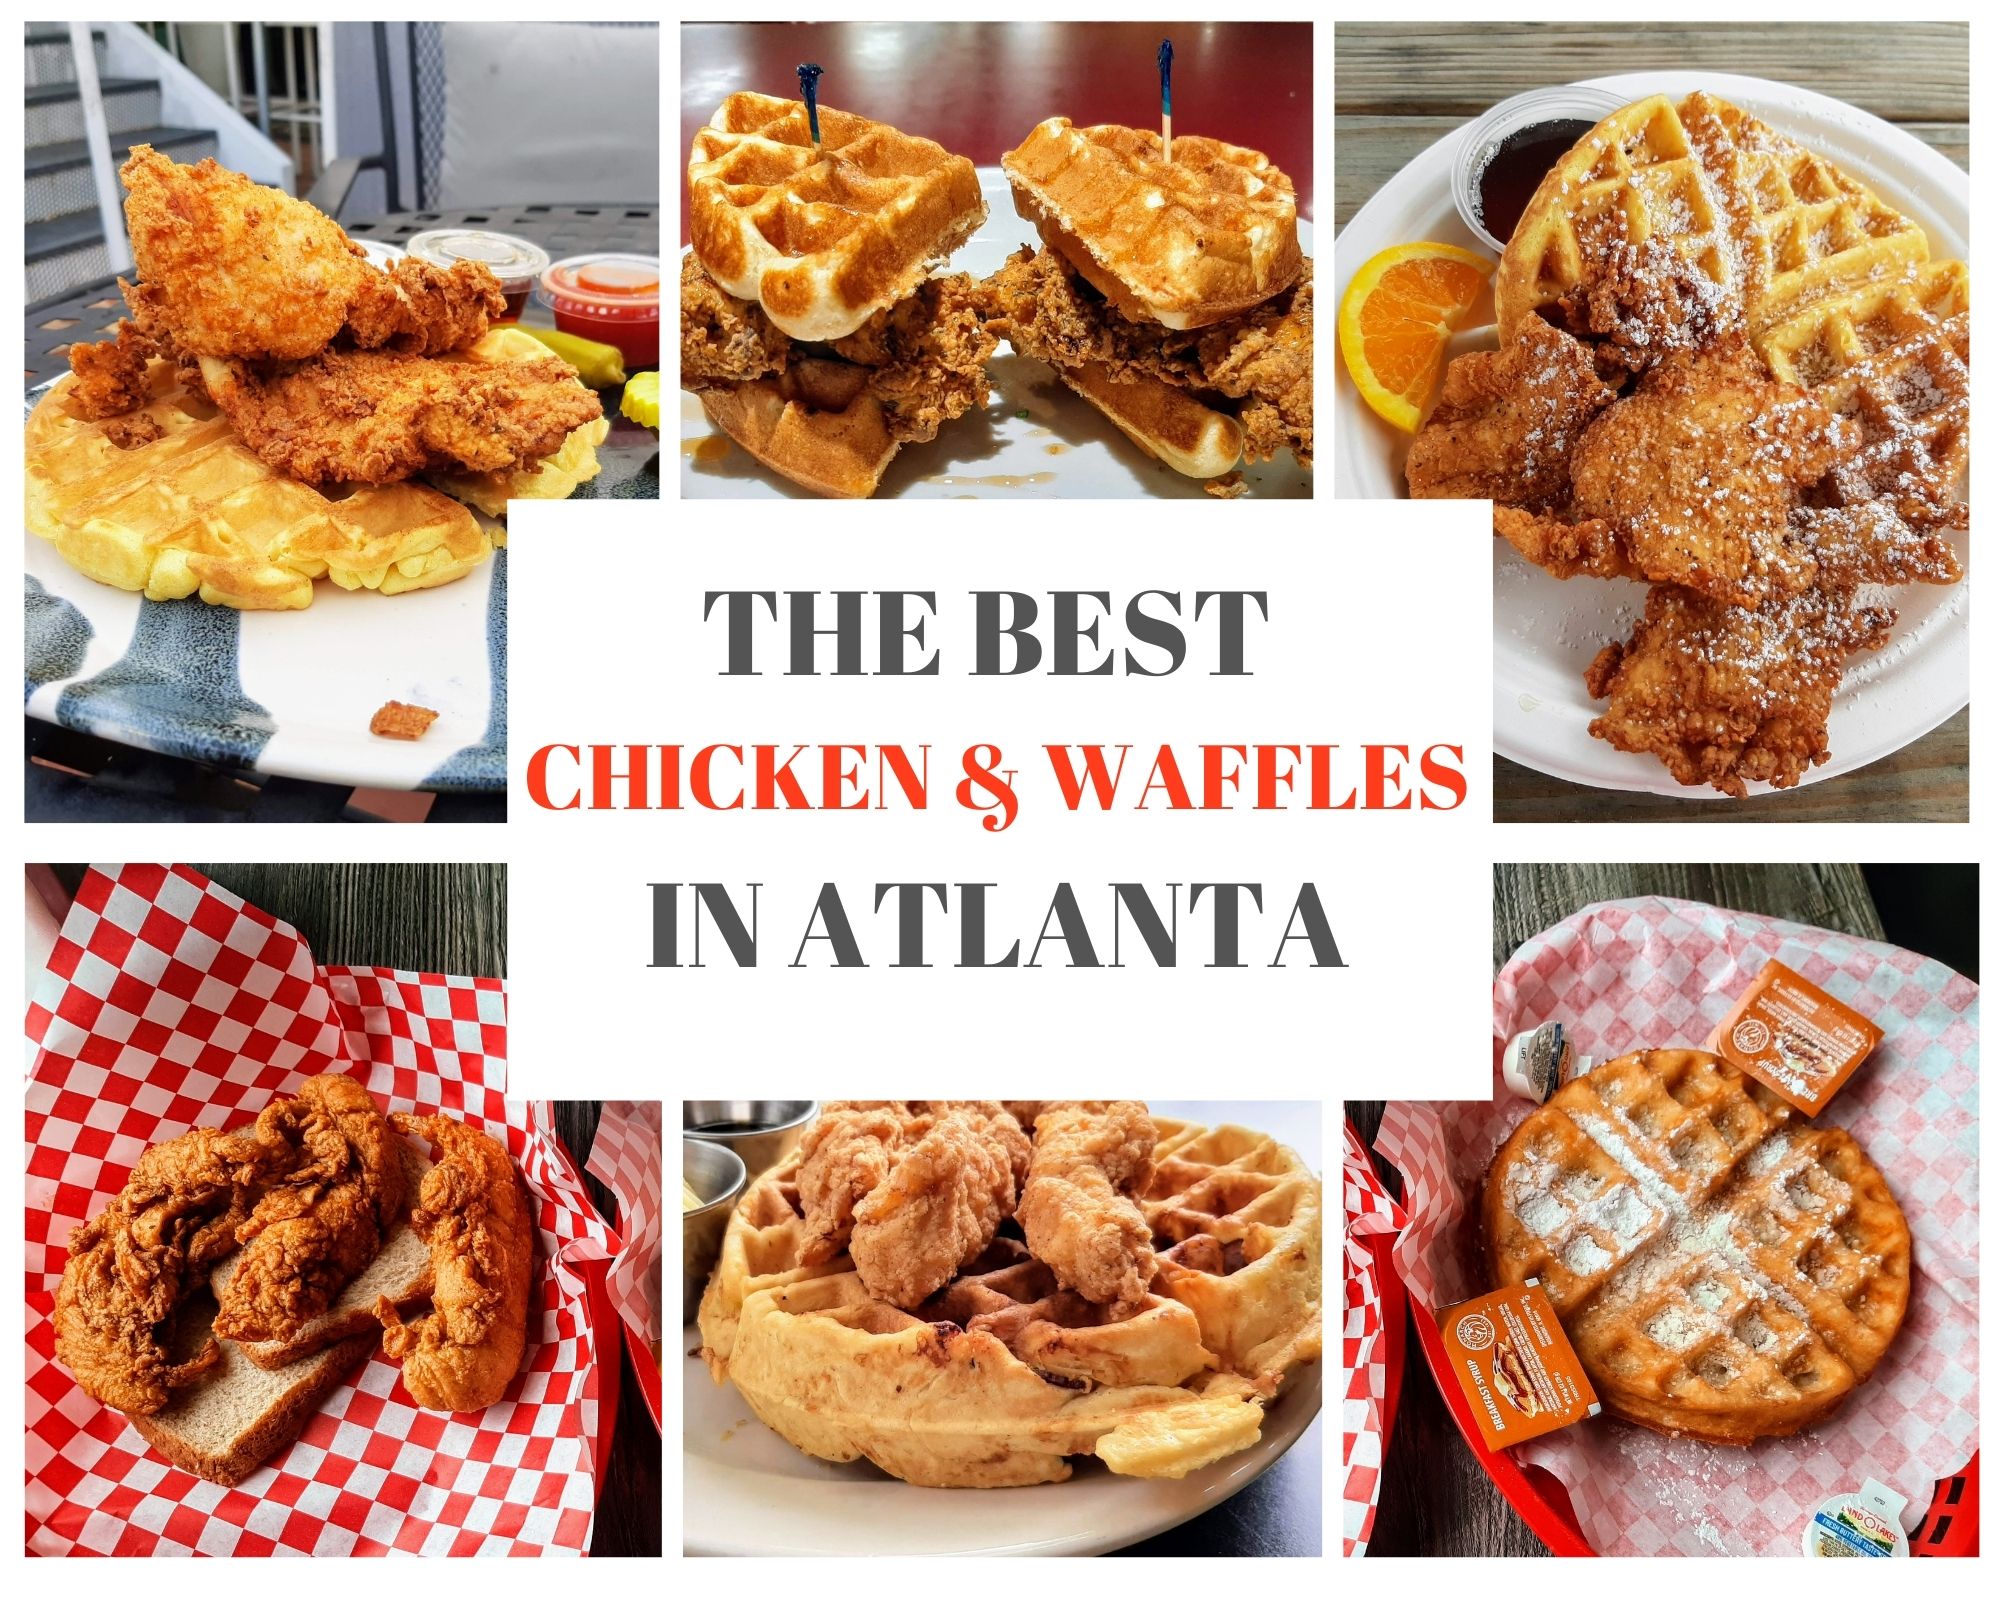 The Best Chicken and Waffles in Atlanta - The Fearless Foreigner